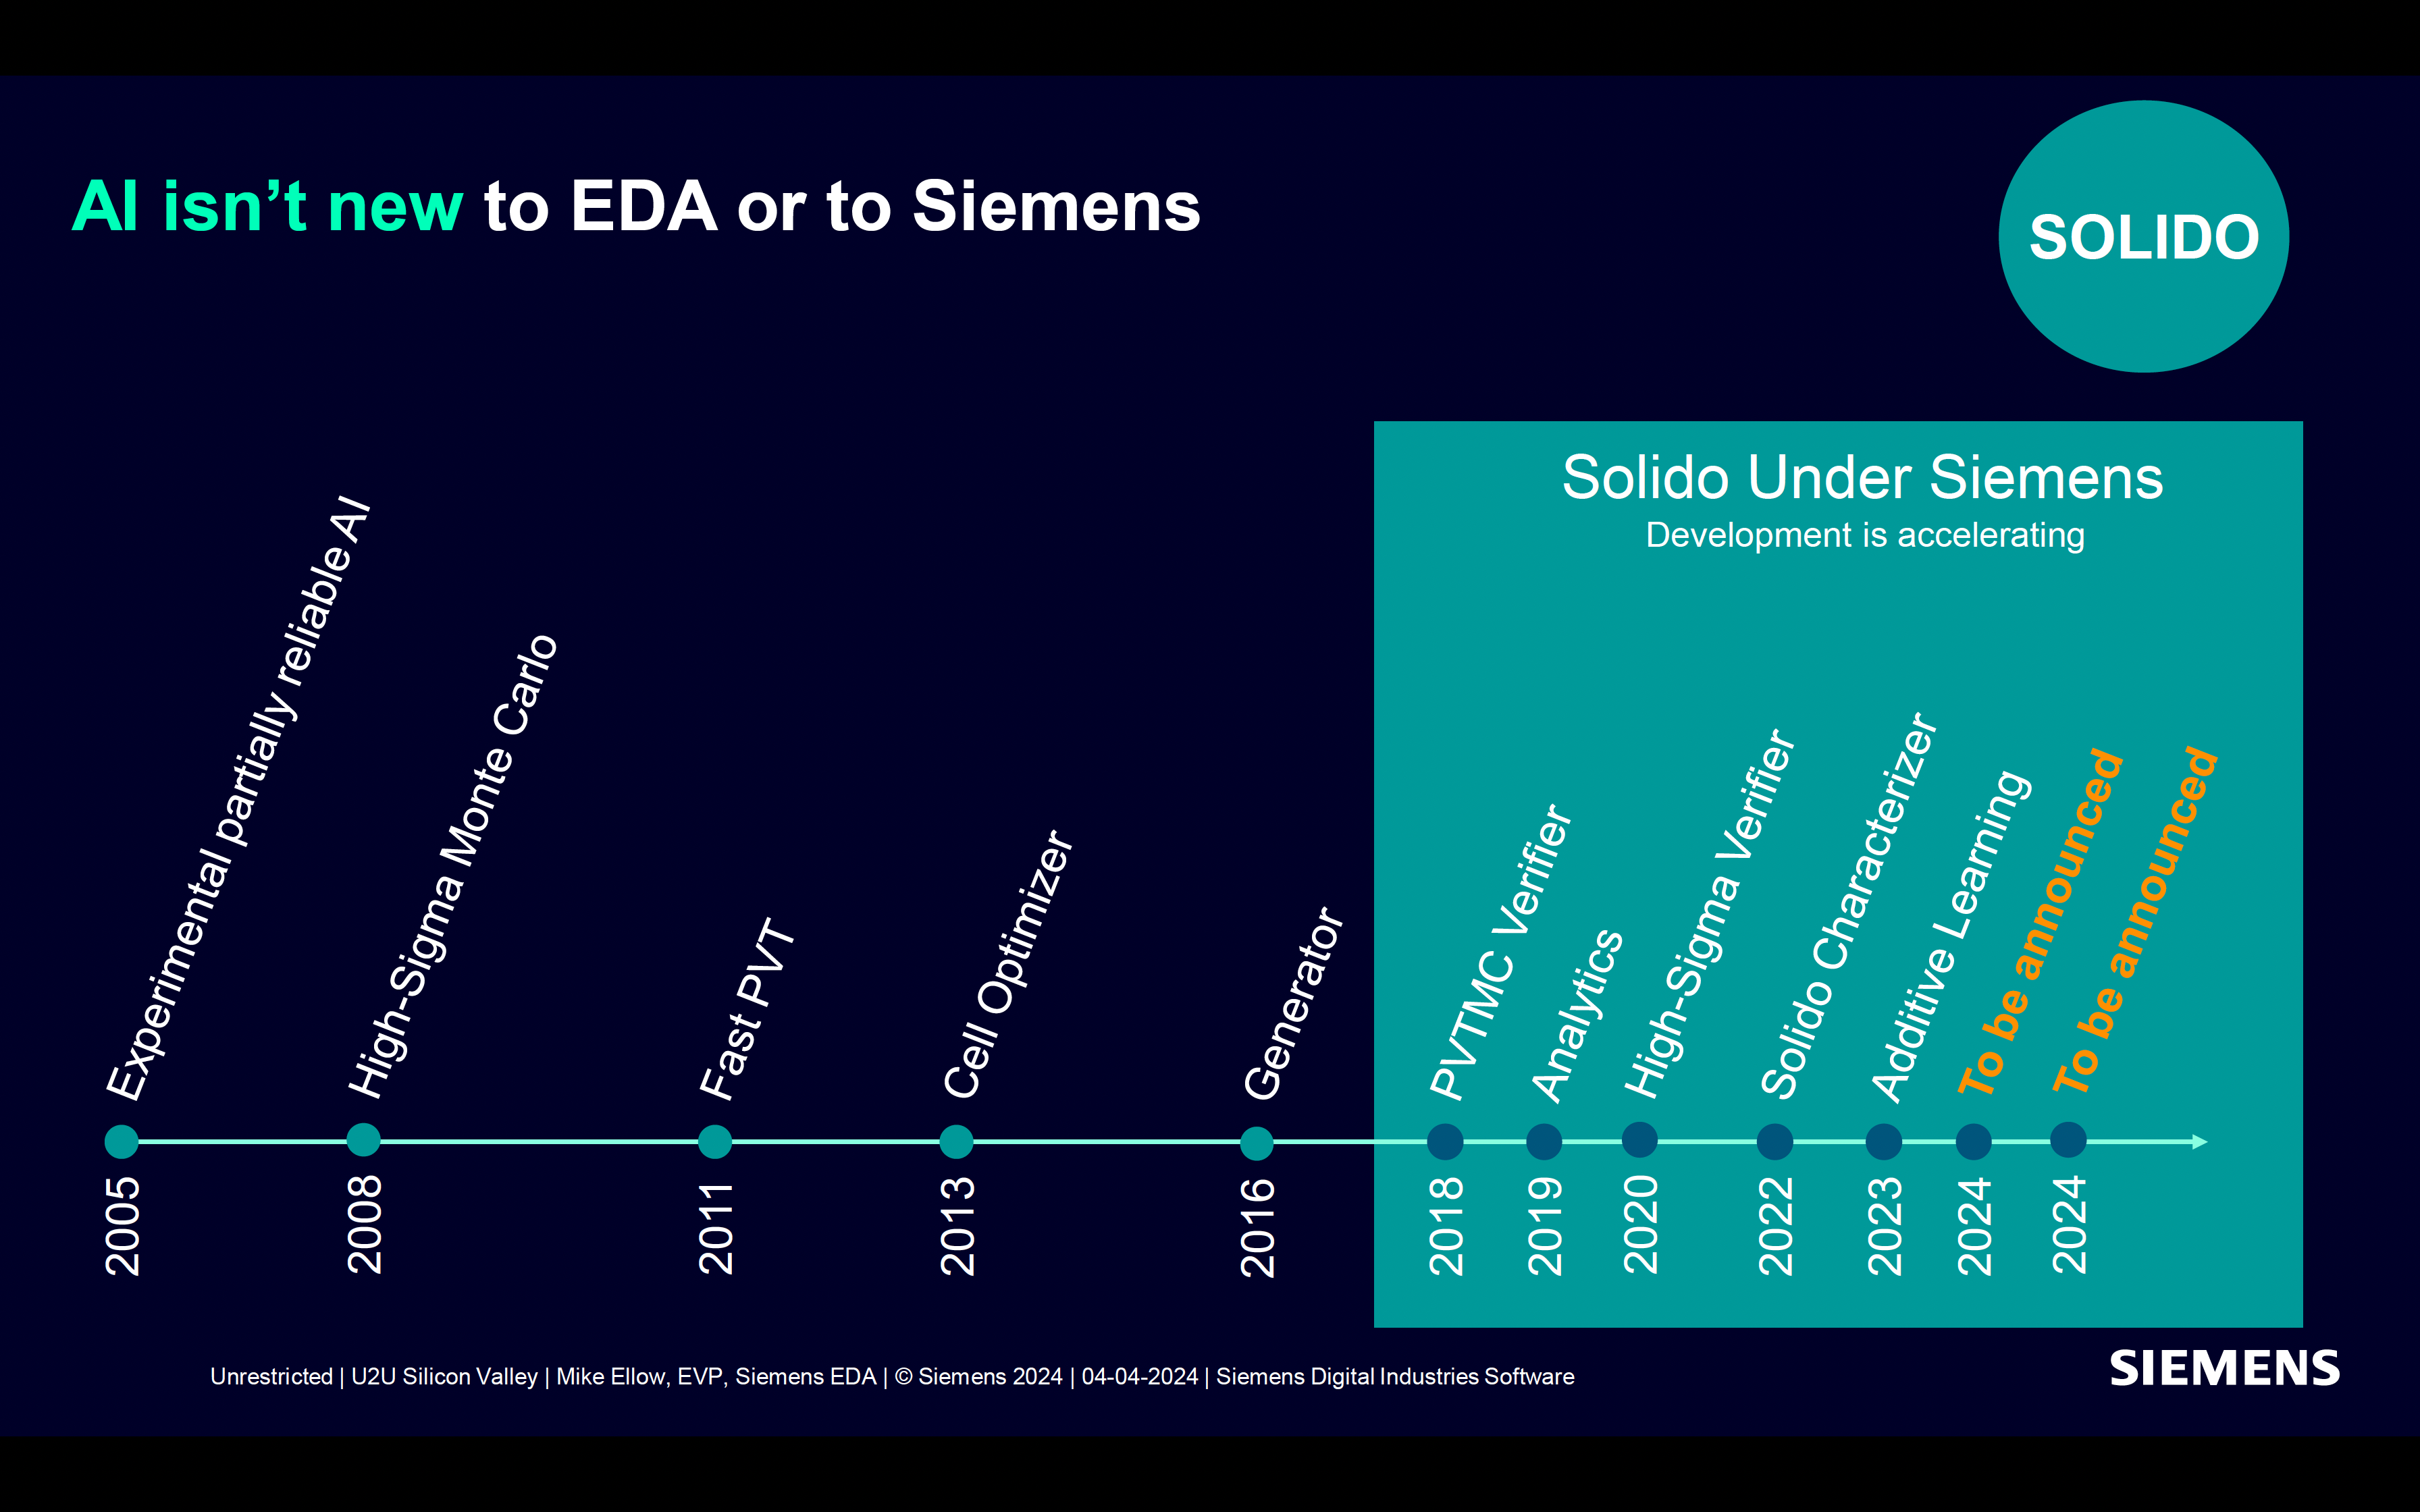 Solido Under Siemens and AI